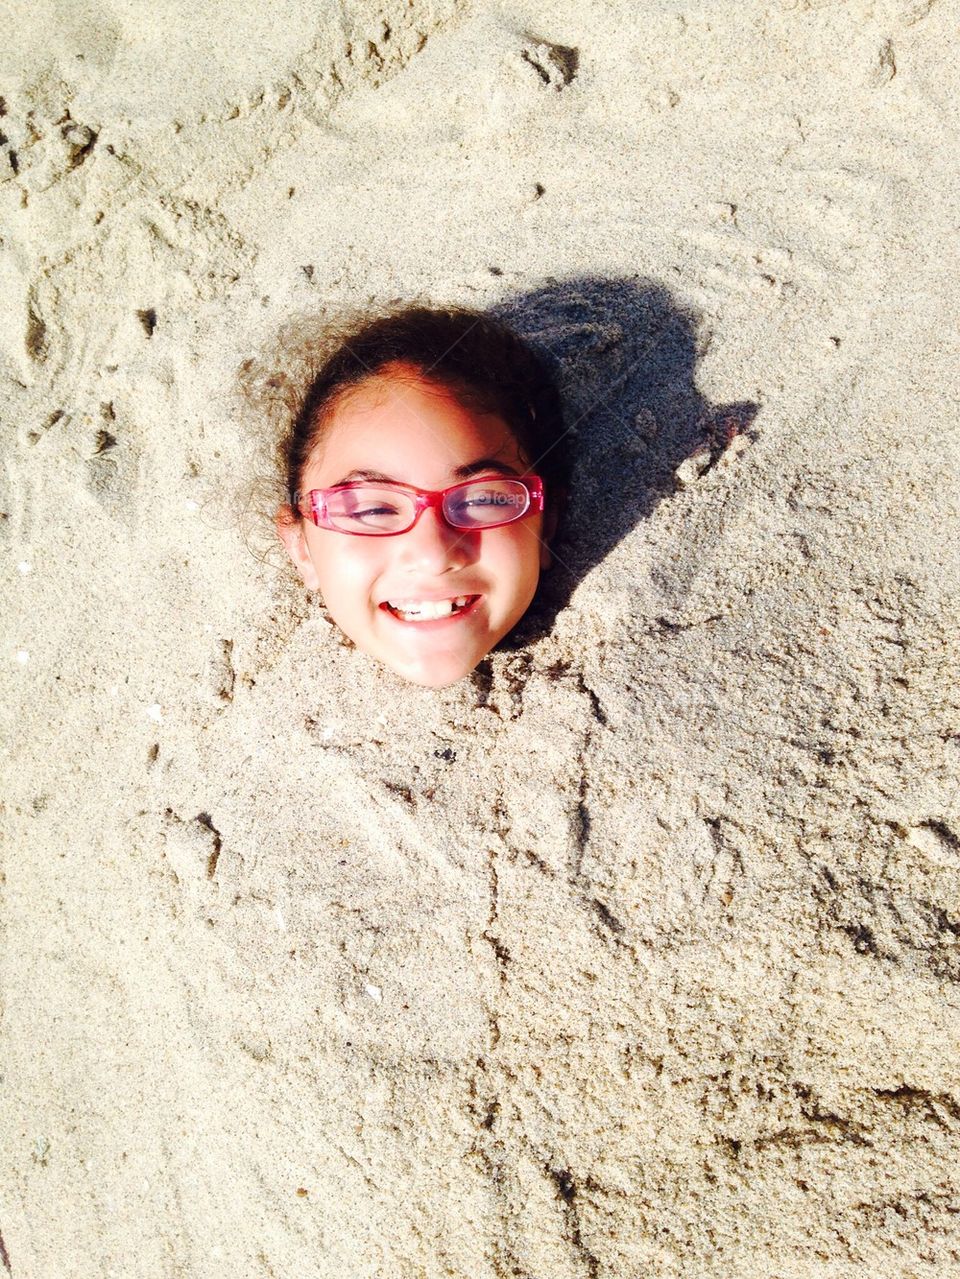 Daughter in sand